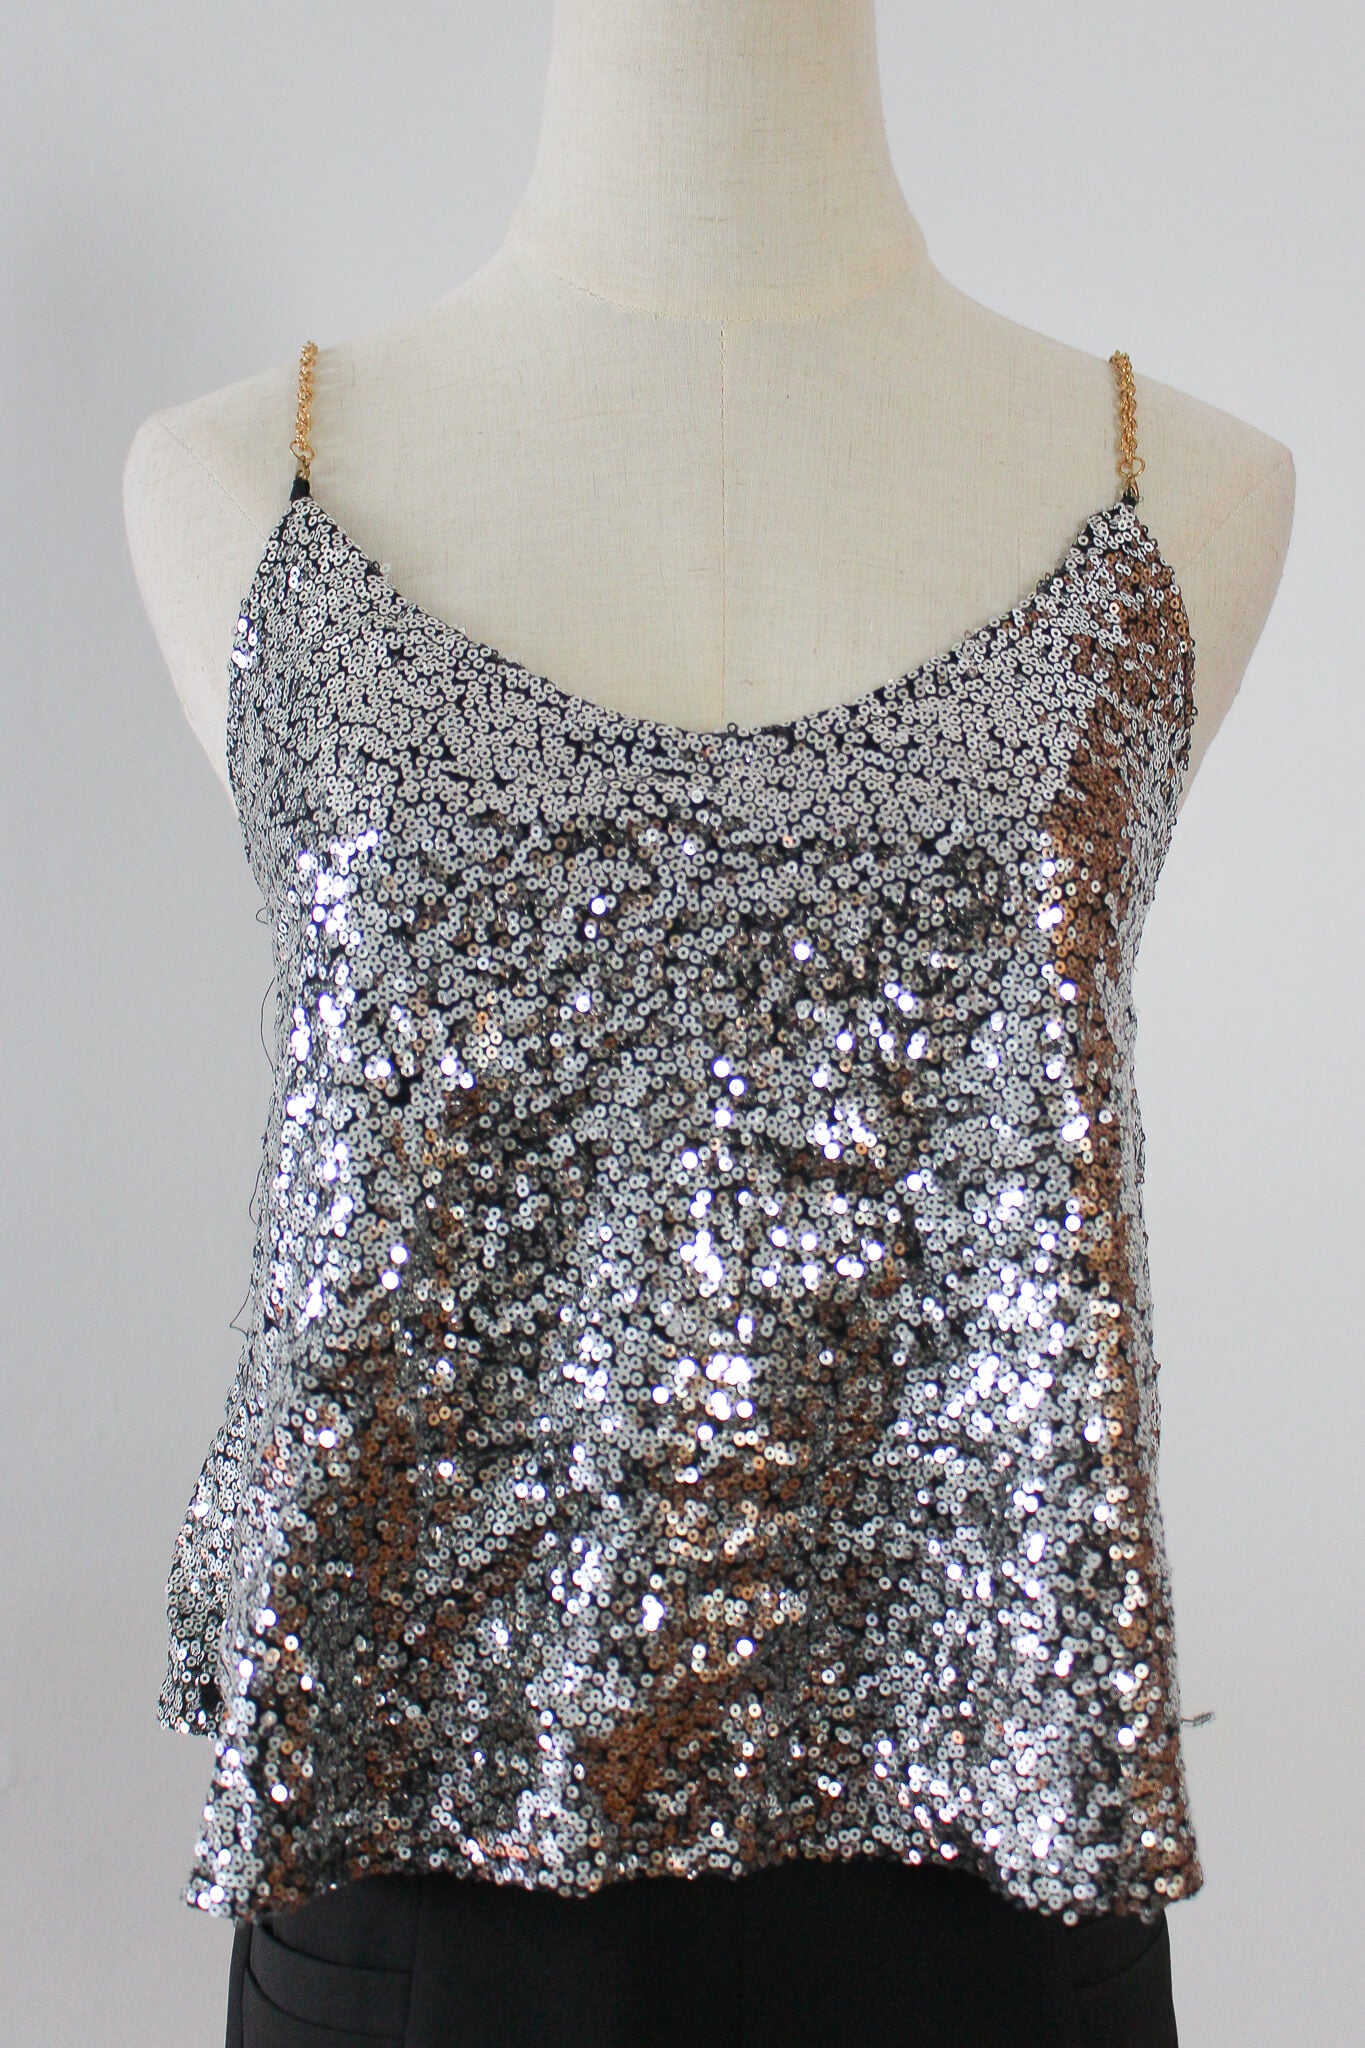 Sequined Camisole tip with gold chain perfect for parties | taylor swift eras tour outfit inspo 1989 sparkly top 